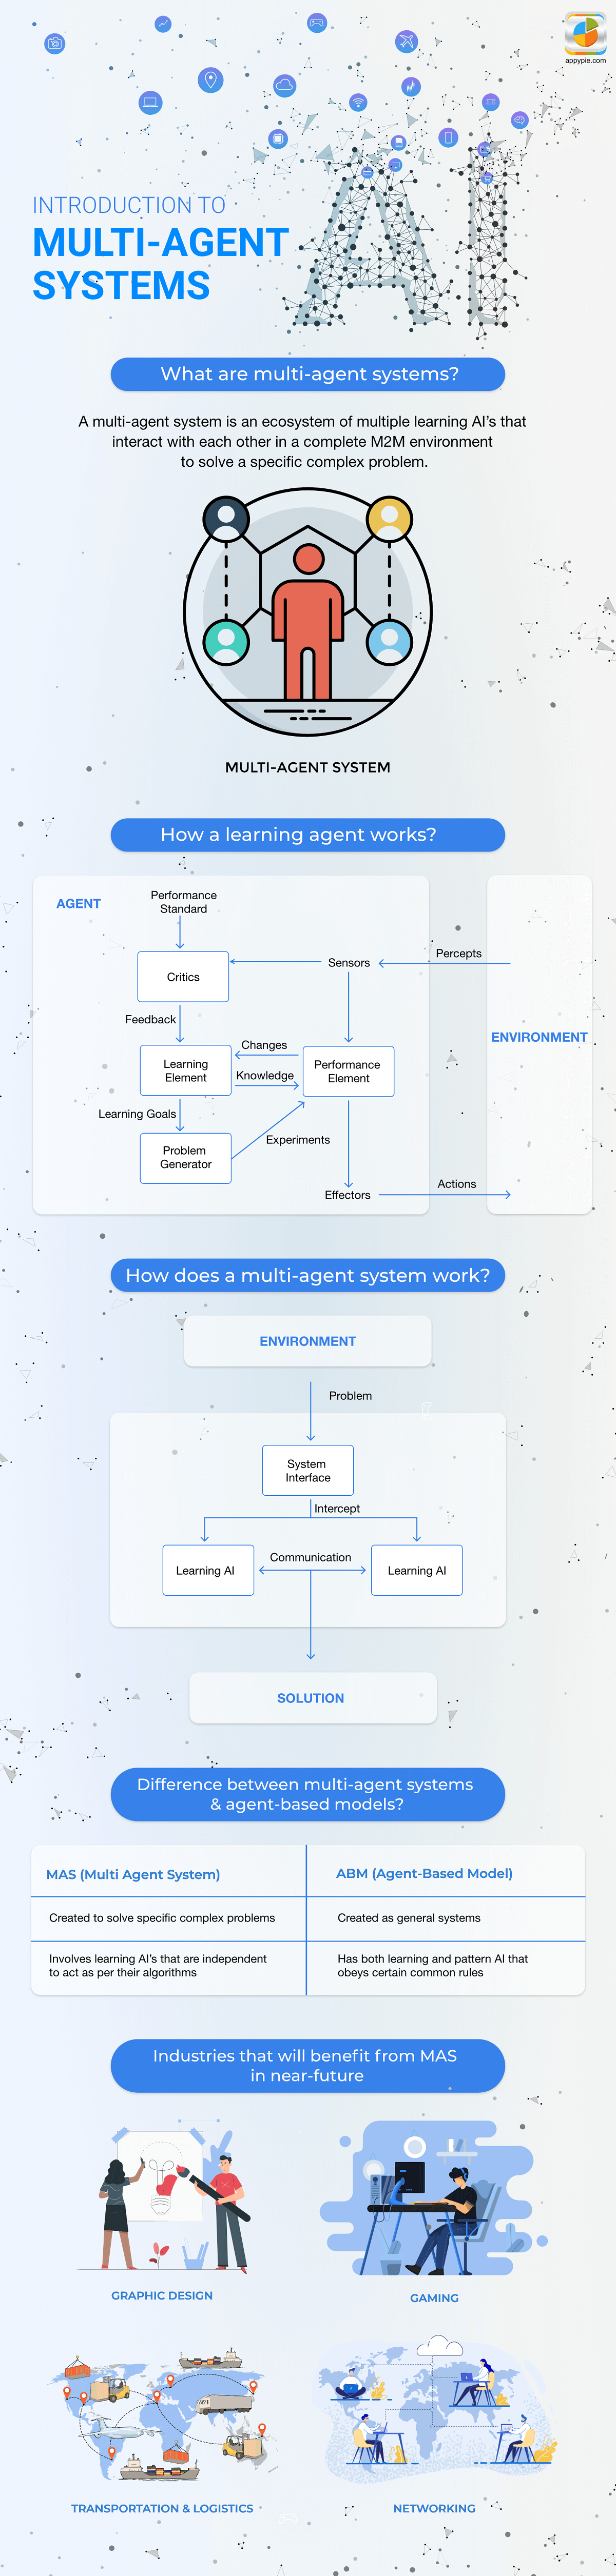 Why Multi-Agent Systems will Make AI Better